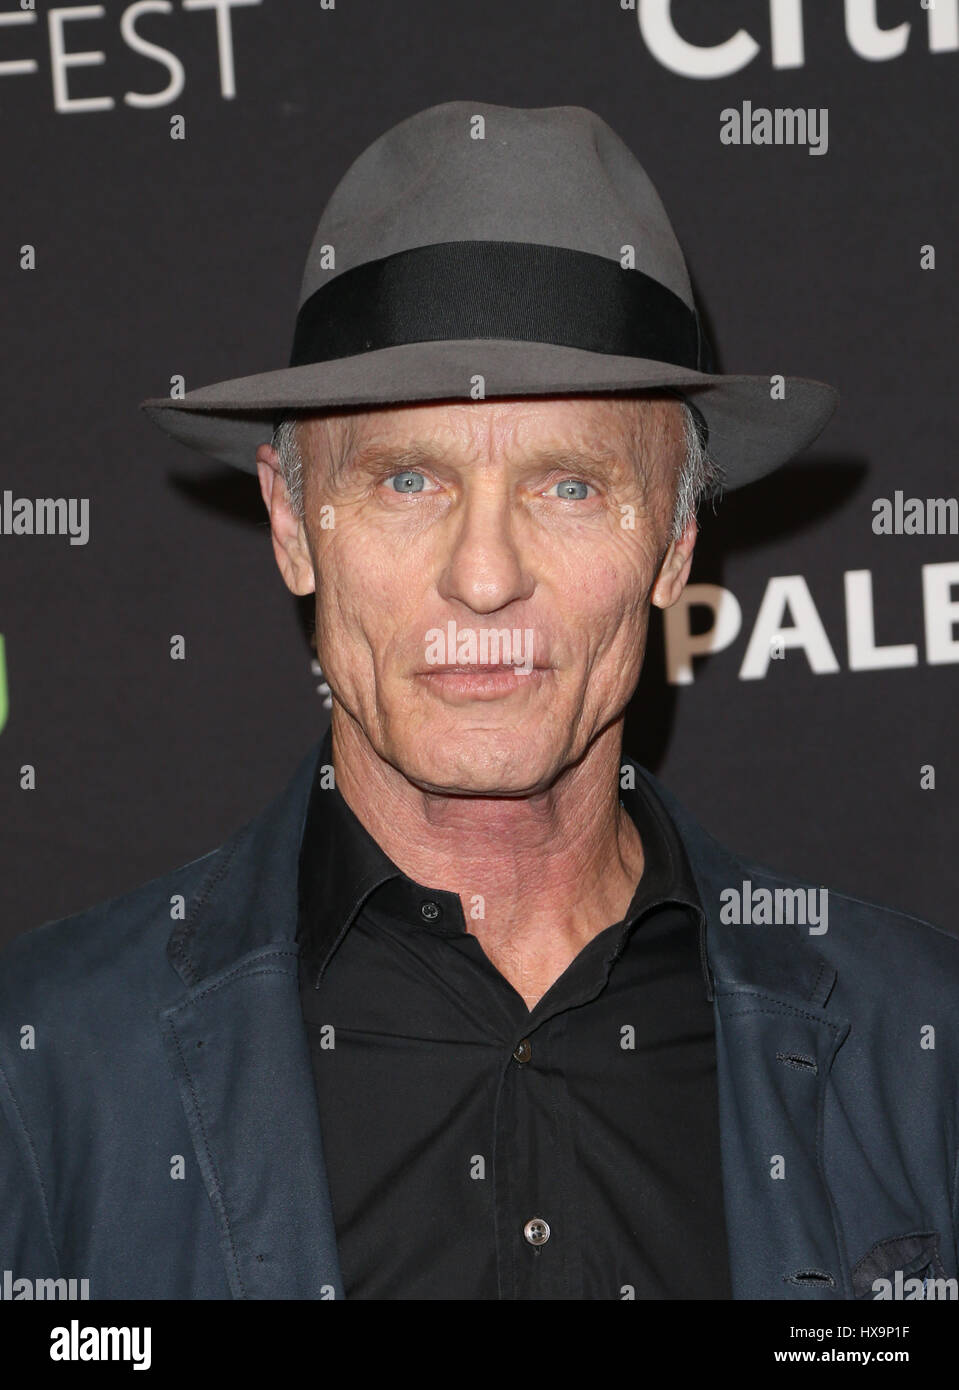 Hollywood, Ca. 25th Mar, 2017. Ed Harris, At The The Paley Center For Media's 34th Annual PaleyFest Los Angeles - 'Westworld' At The Dolby Theatre In California on March 25, 2017. Credit: Fs/Media Punch/Alamy Live News Stock Photo